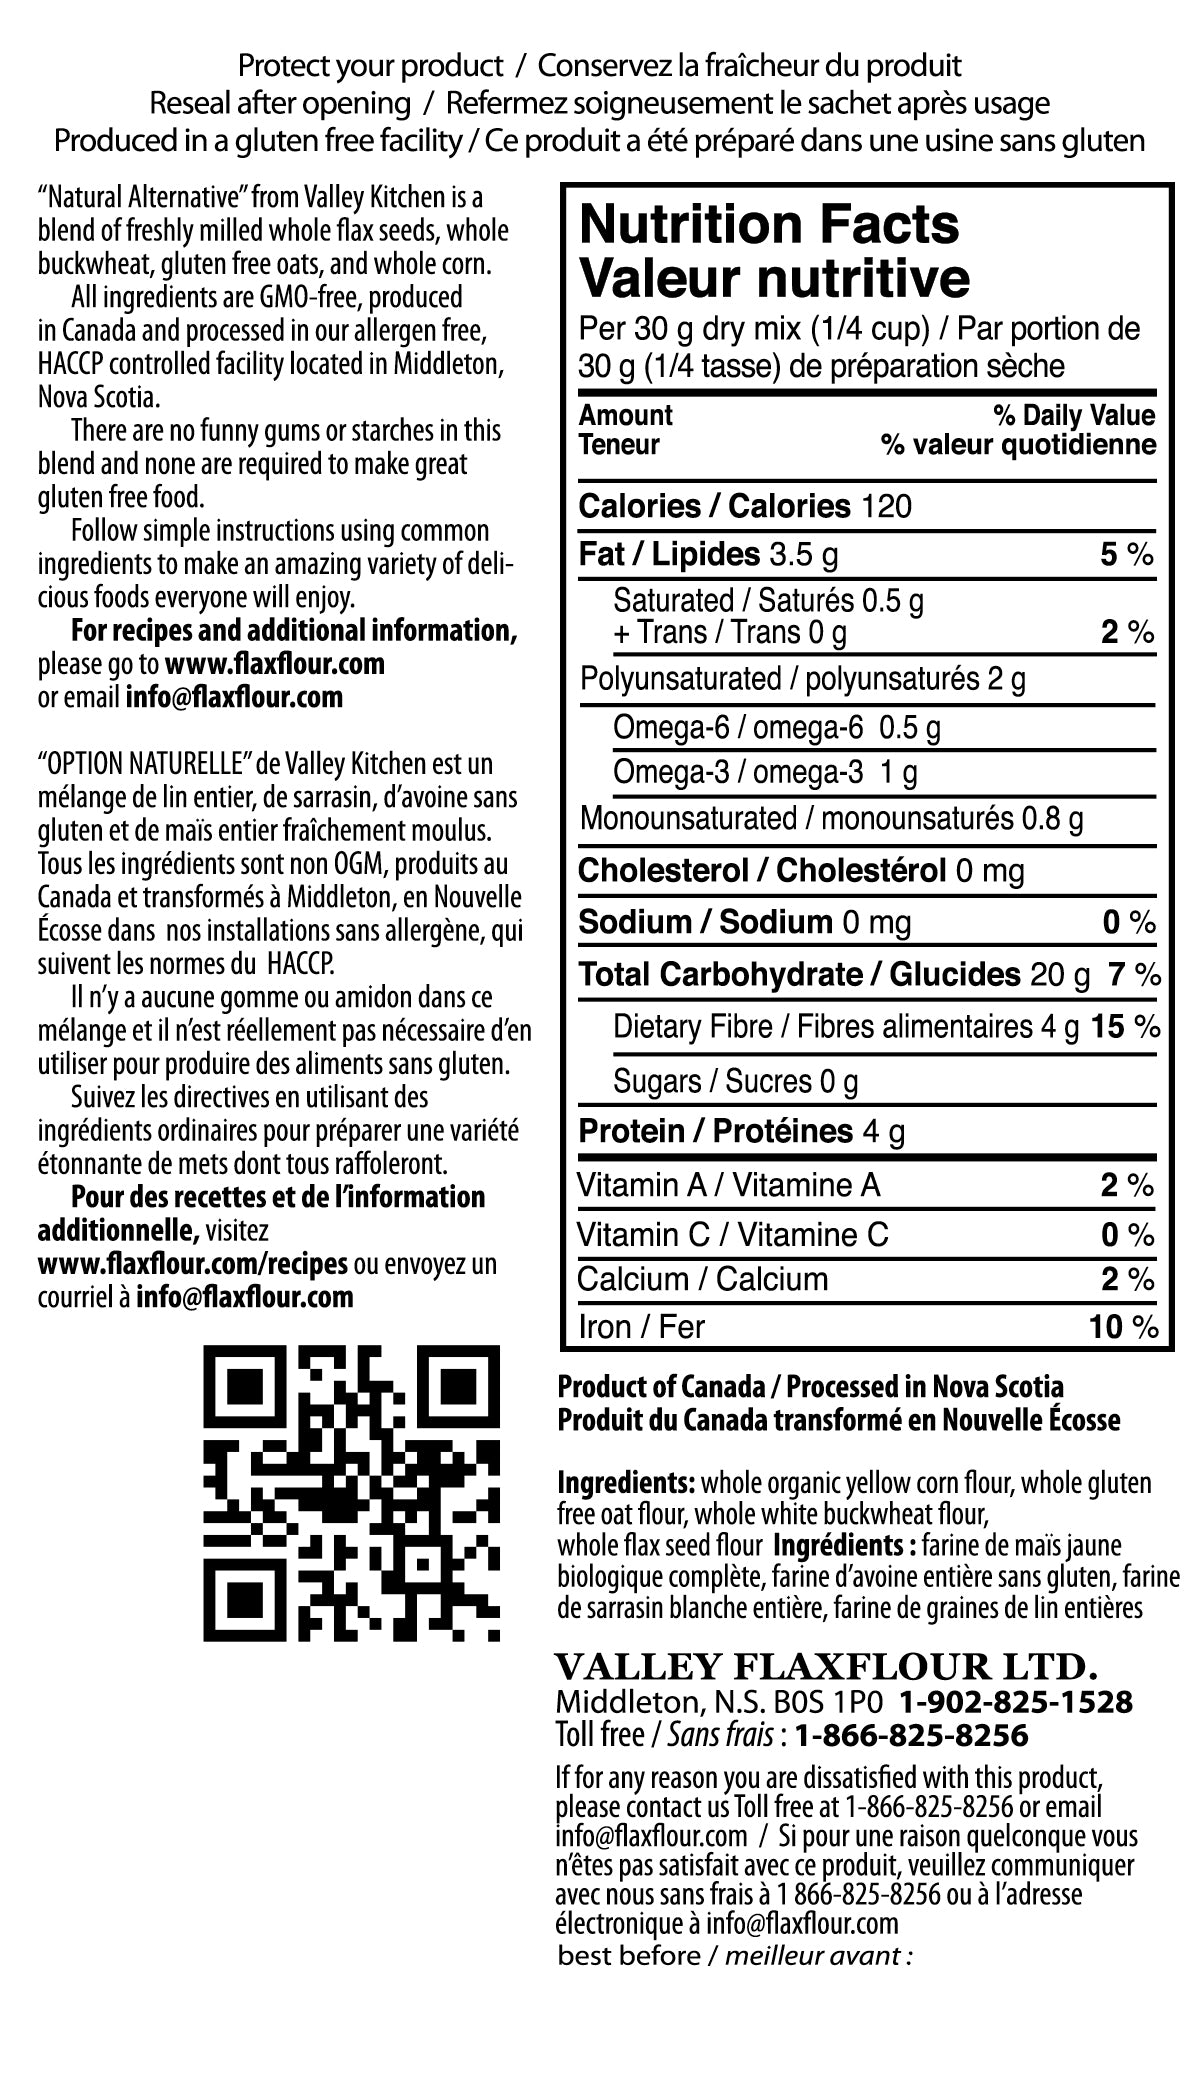 Nutrient information for our gluten free all purpose flour.